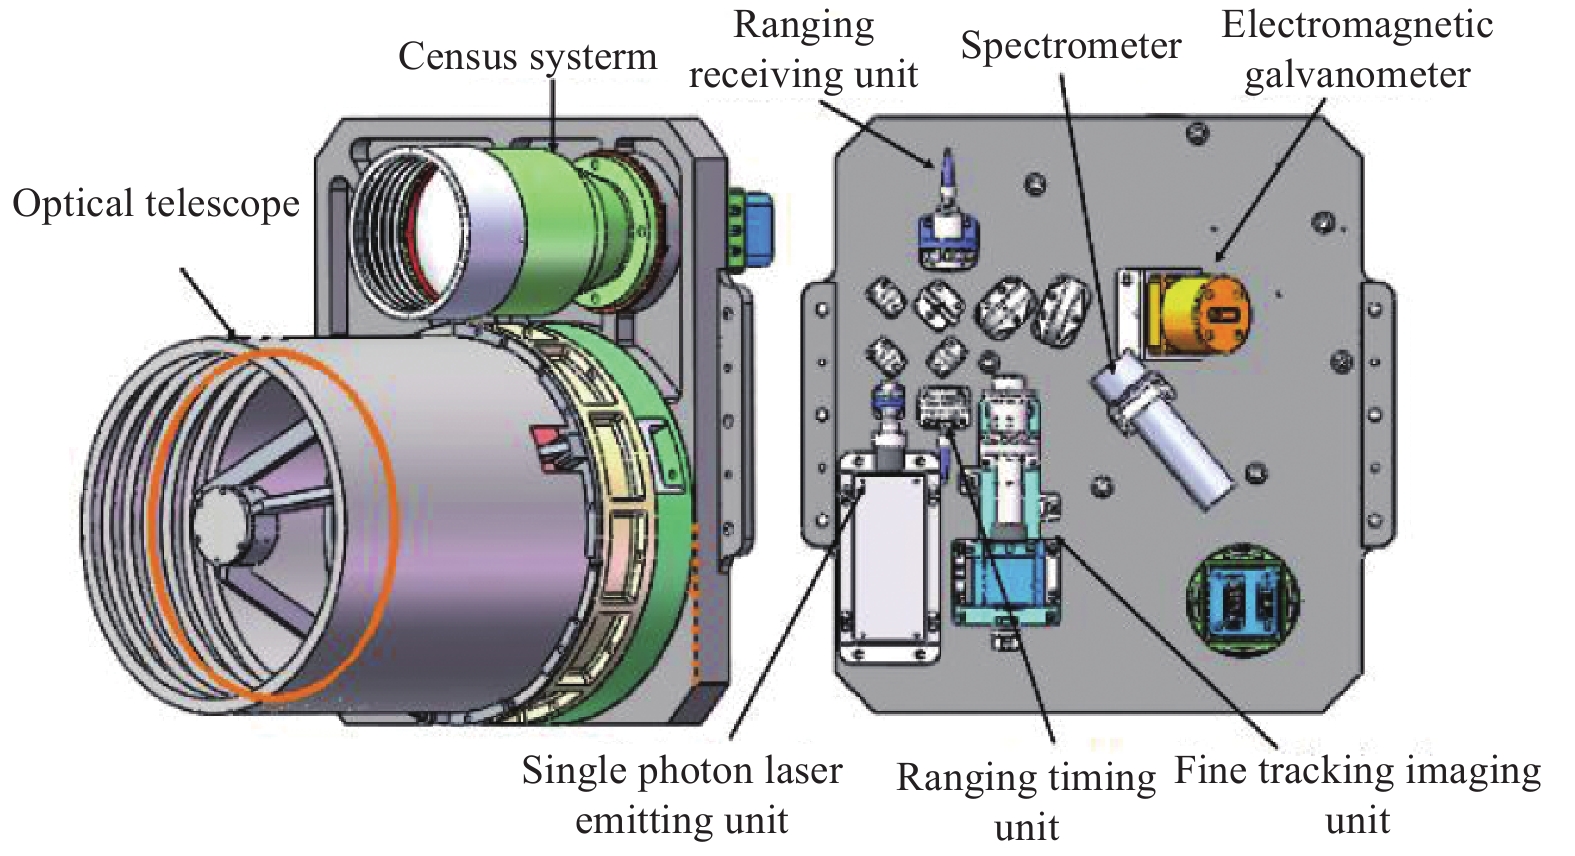 Space debris ranging and imaging composite system